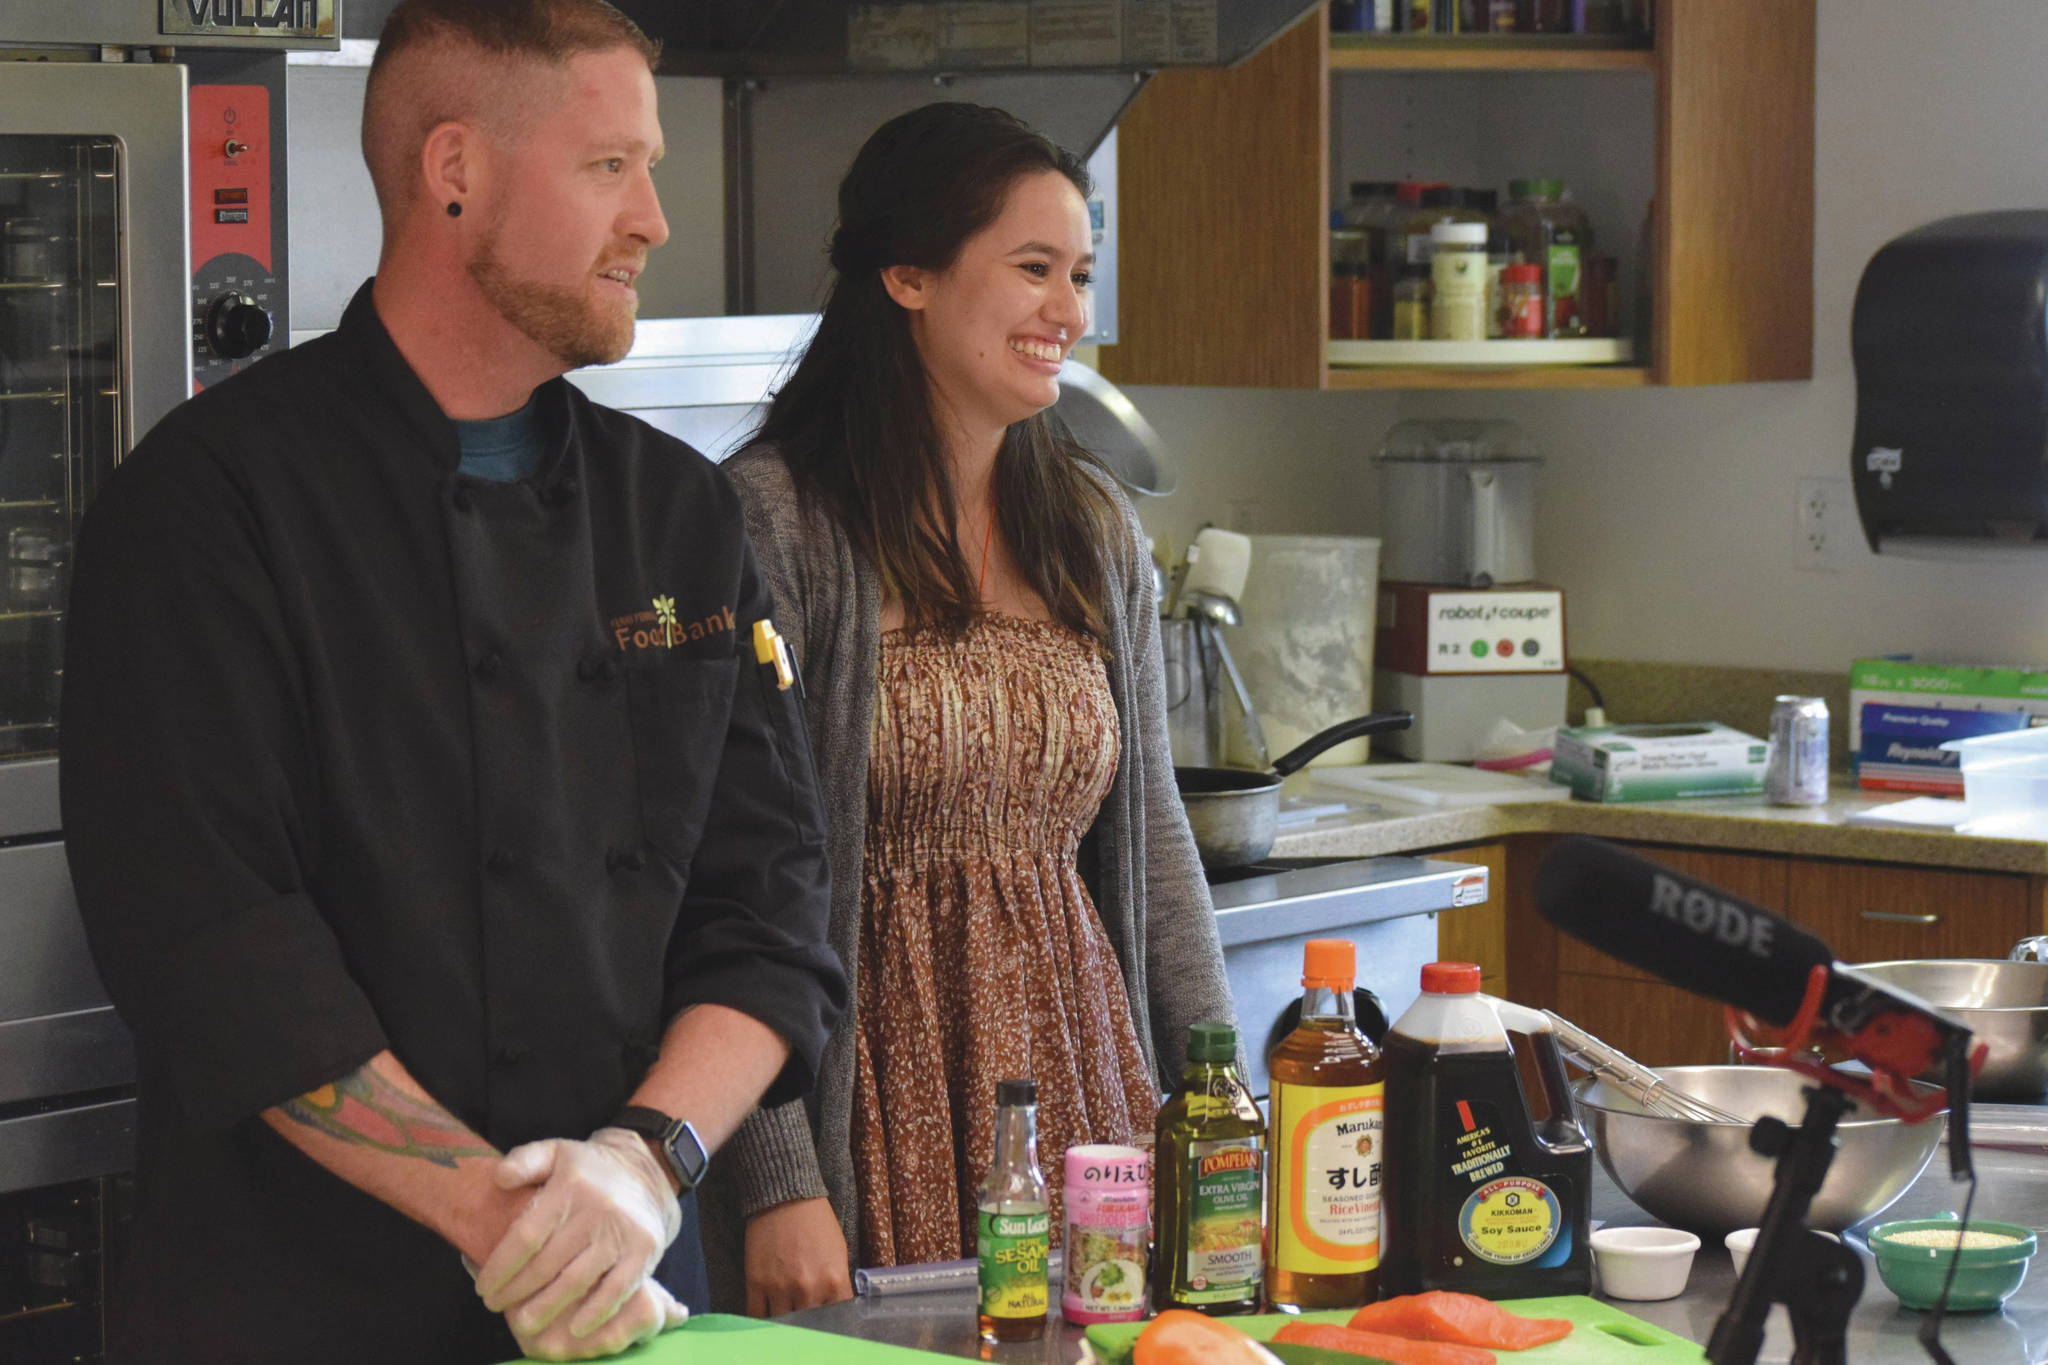 Stephen Lamm and Lilly Murray film a culinary video for the Kenai Peninsula Food Bank's healthy lifestyle eating promotional program Monday, July 19, 2021, at the food bank diner just outside of Soldotna. (Photo by Camille Botello/Peninsula Clarion)